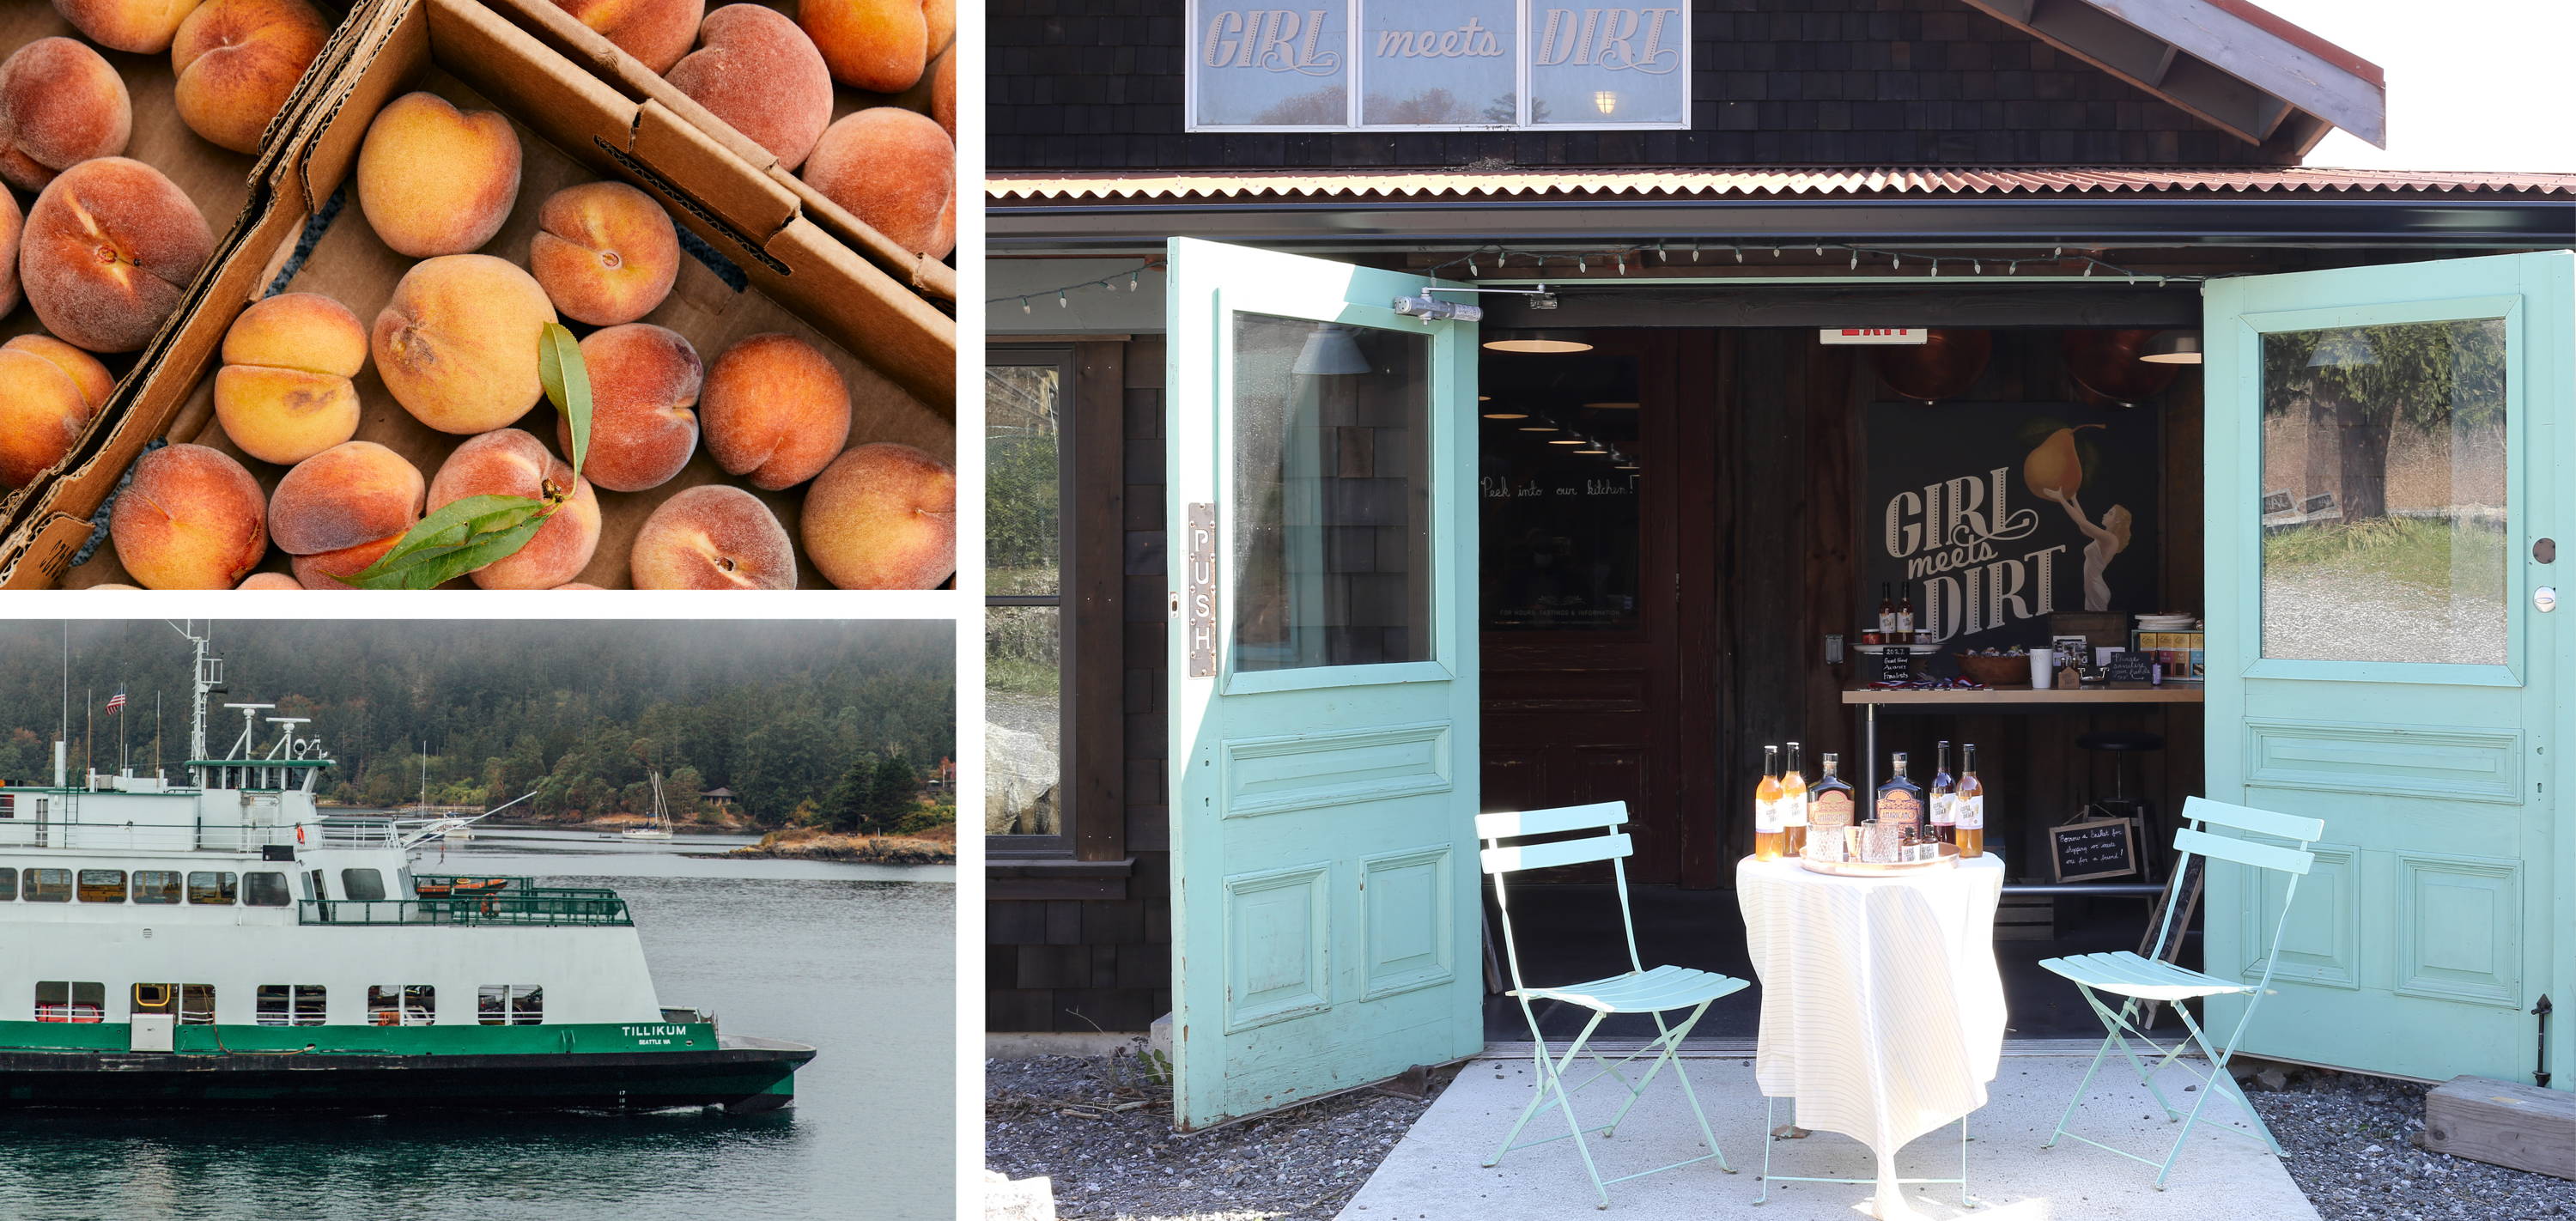 Top left: peaches in fruit boxes. Bottom left: Washington state ferry . Right: Blue cafe table & chairs with shrubs & mixers on top in front of open doors to Girl Meets Dirt handpicked retail shop.